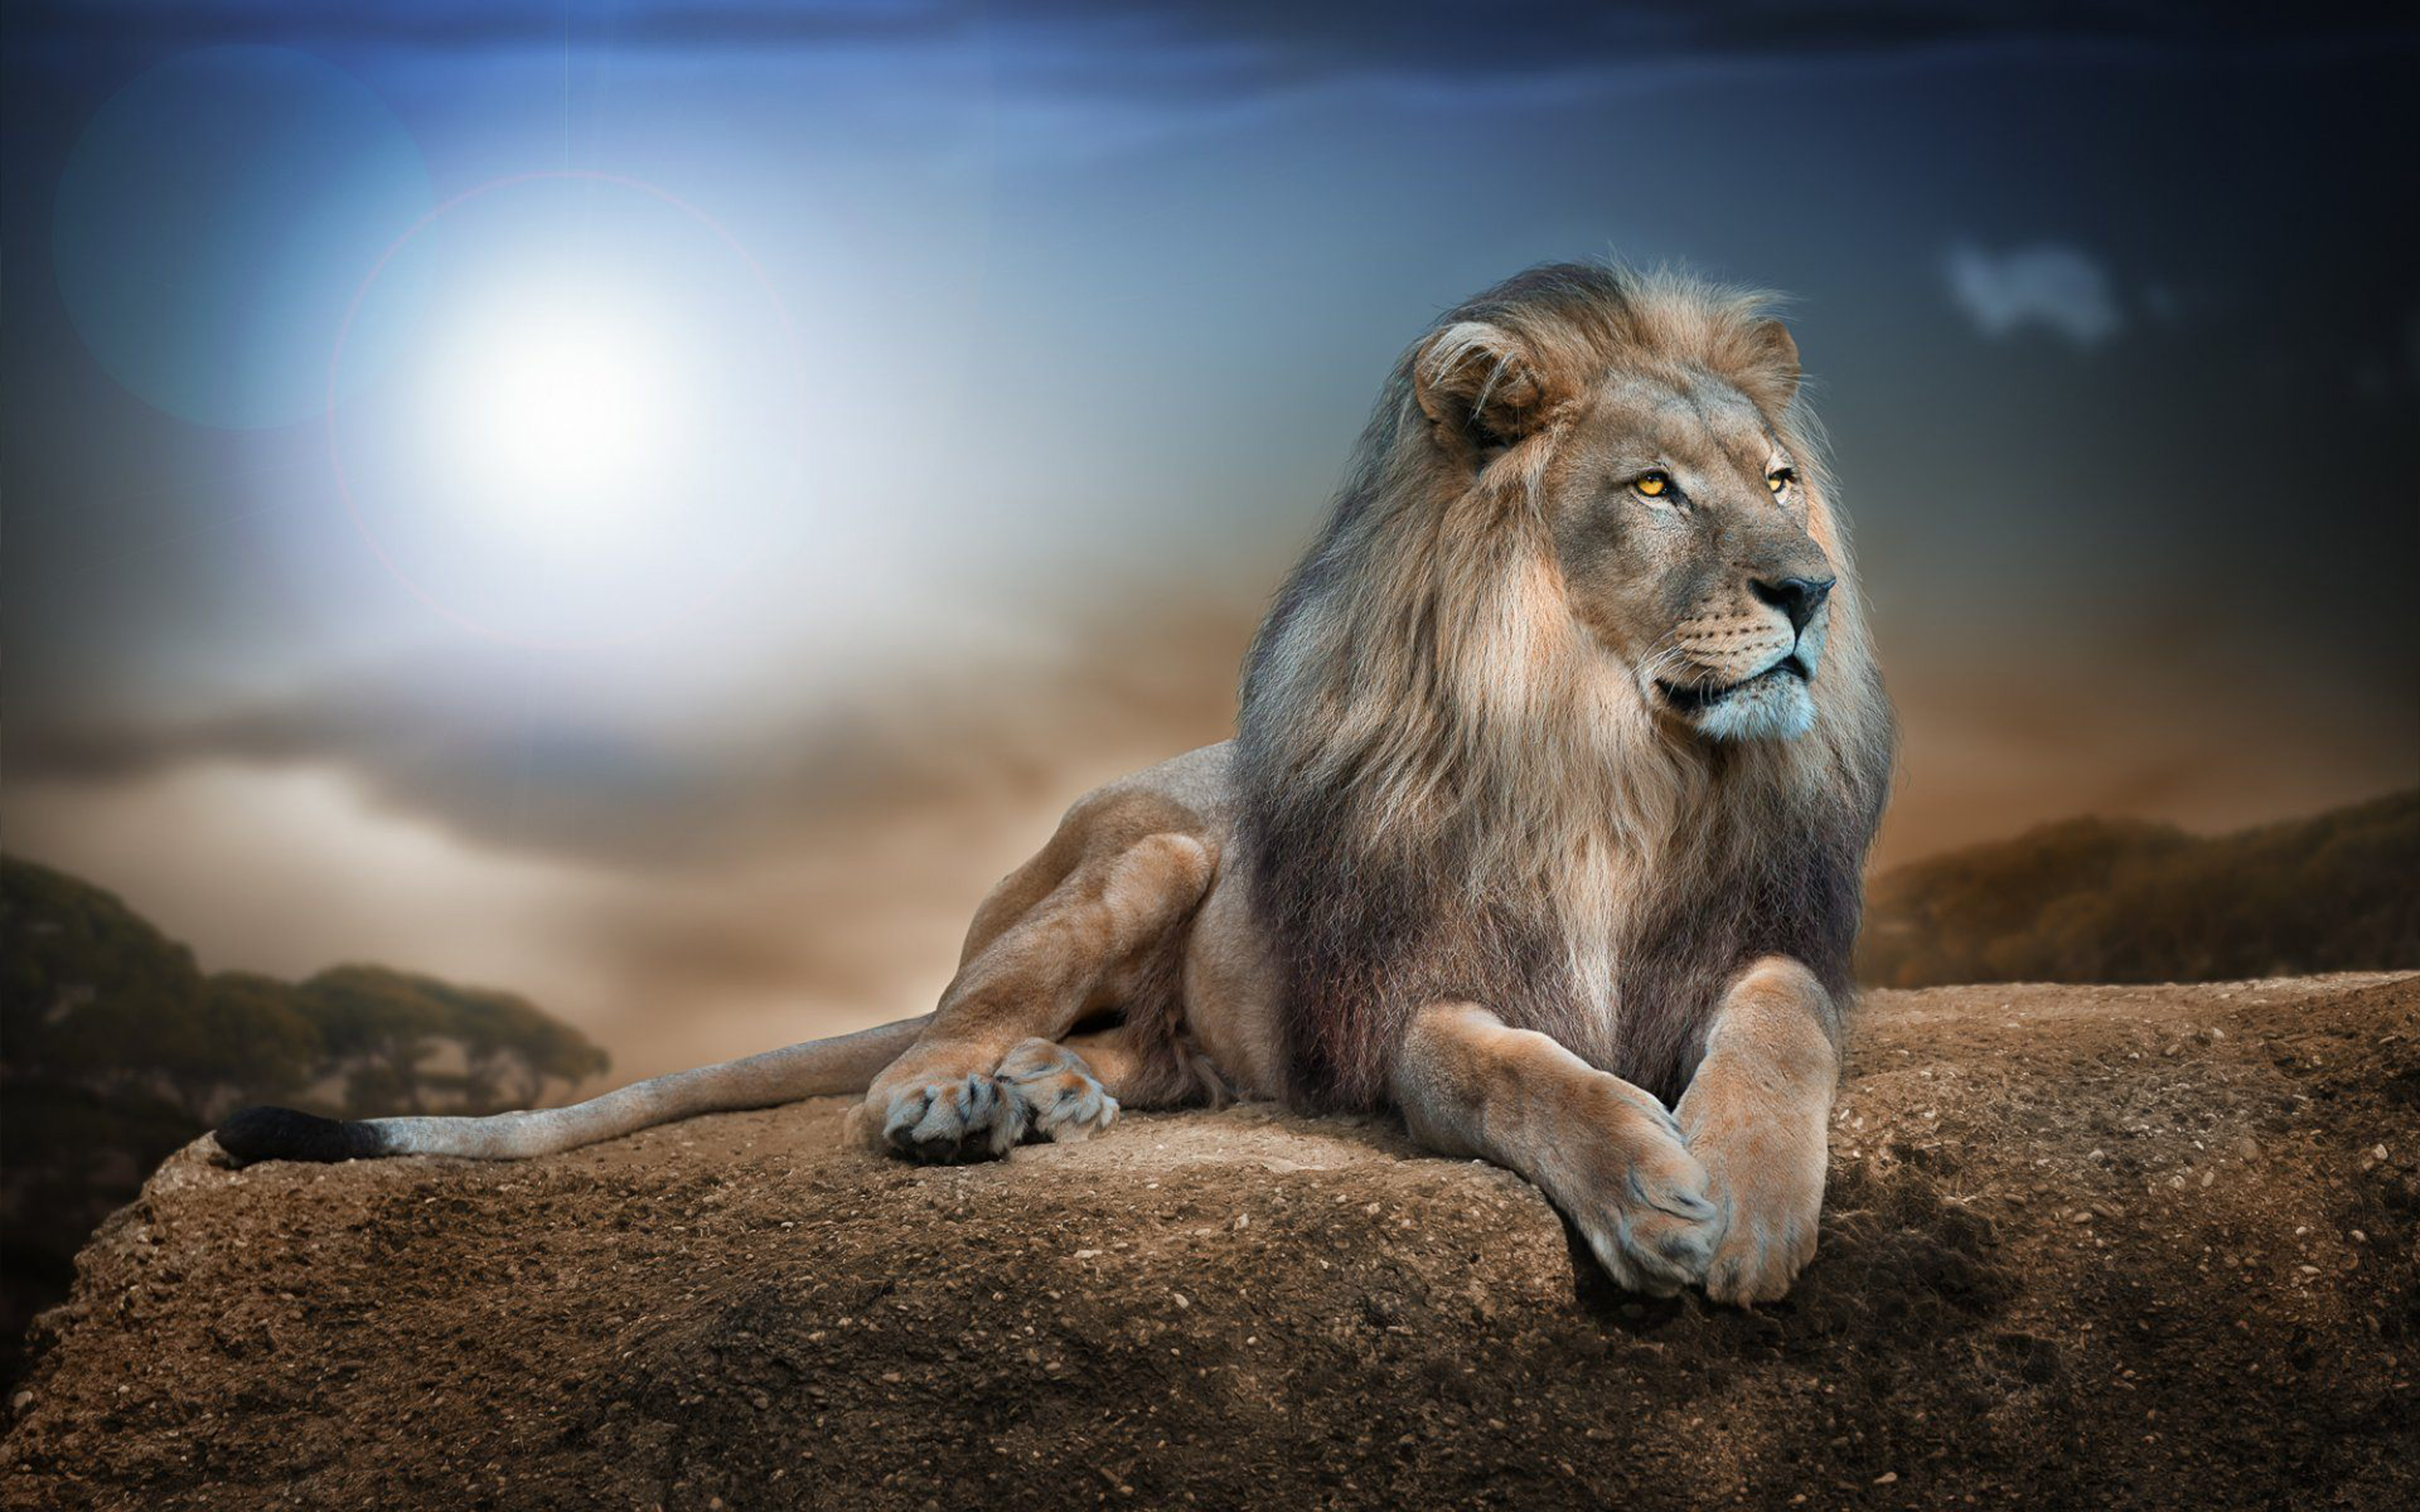 The Lion IPhone Wallpaper HD  IPhone Wallpapers  iPhone Wallpapers